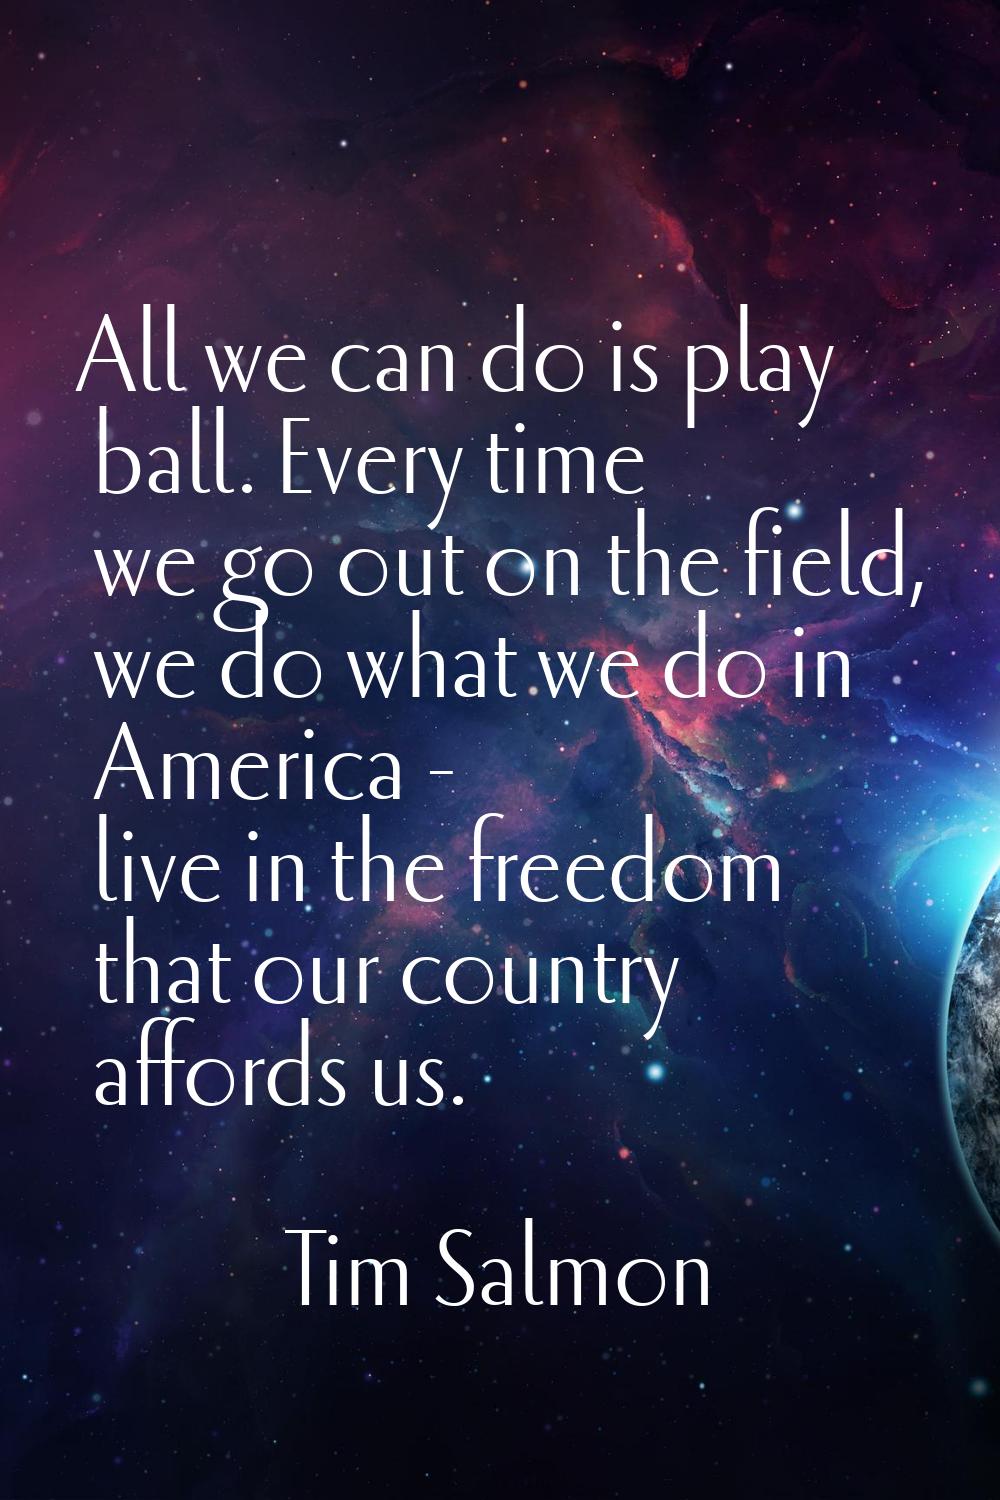 All we can do is play ball. Every time we go out on the field, we do what we do in America - live i